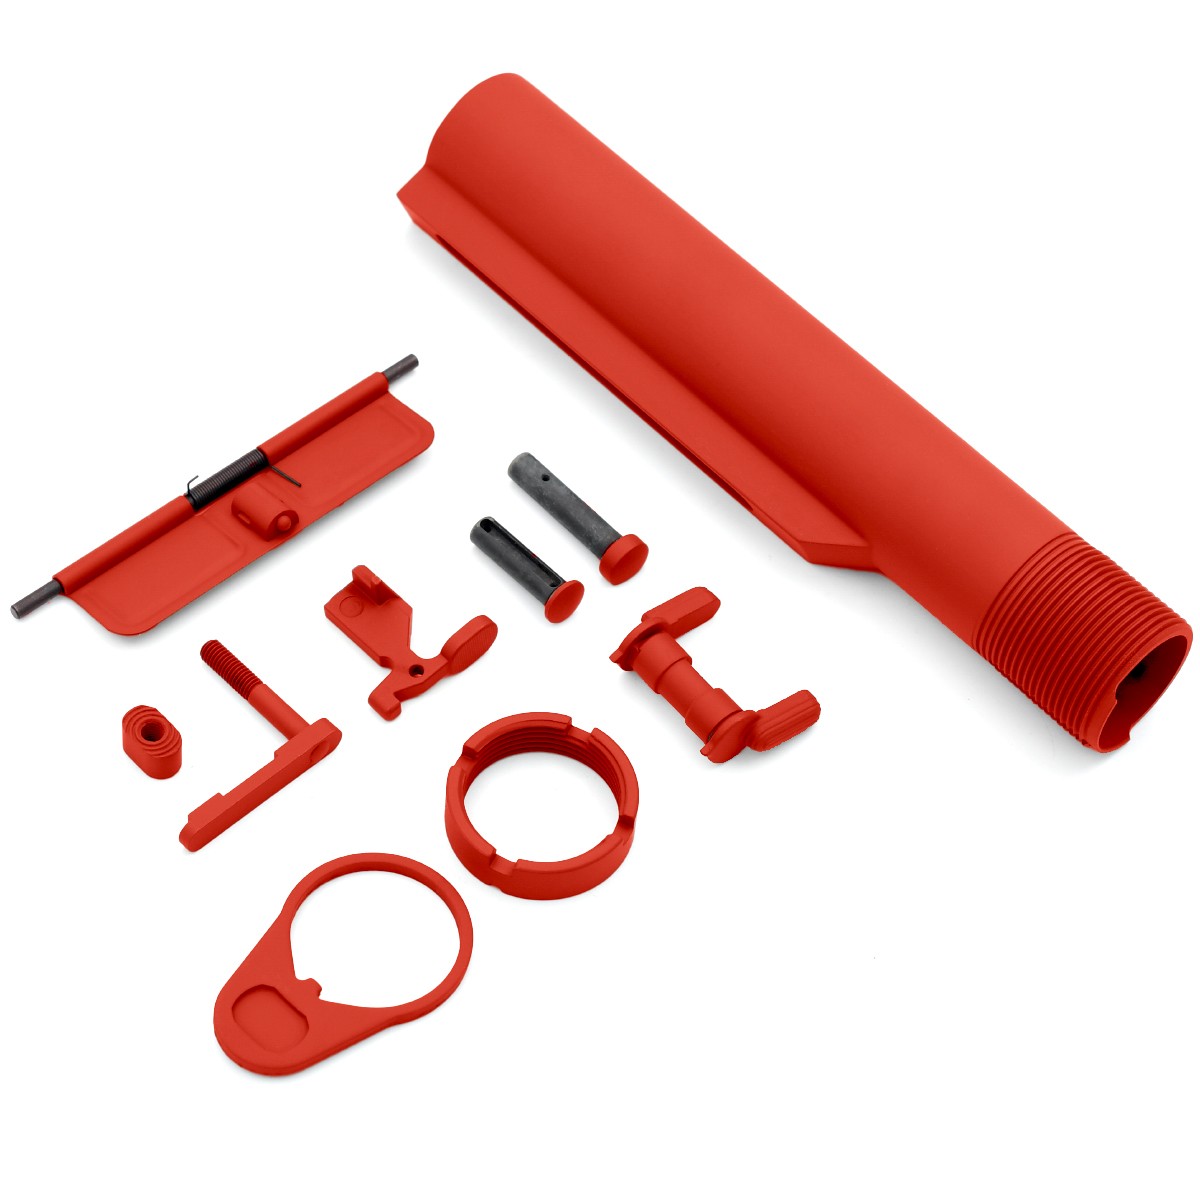 AT3 Tactical AR-15 Ultimate Cerakote Color Upgrade Kit - Red